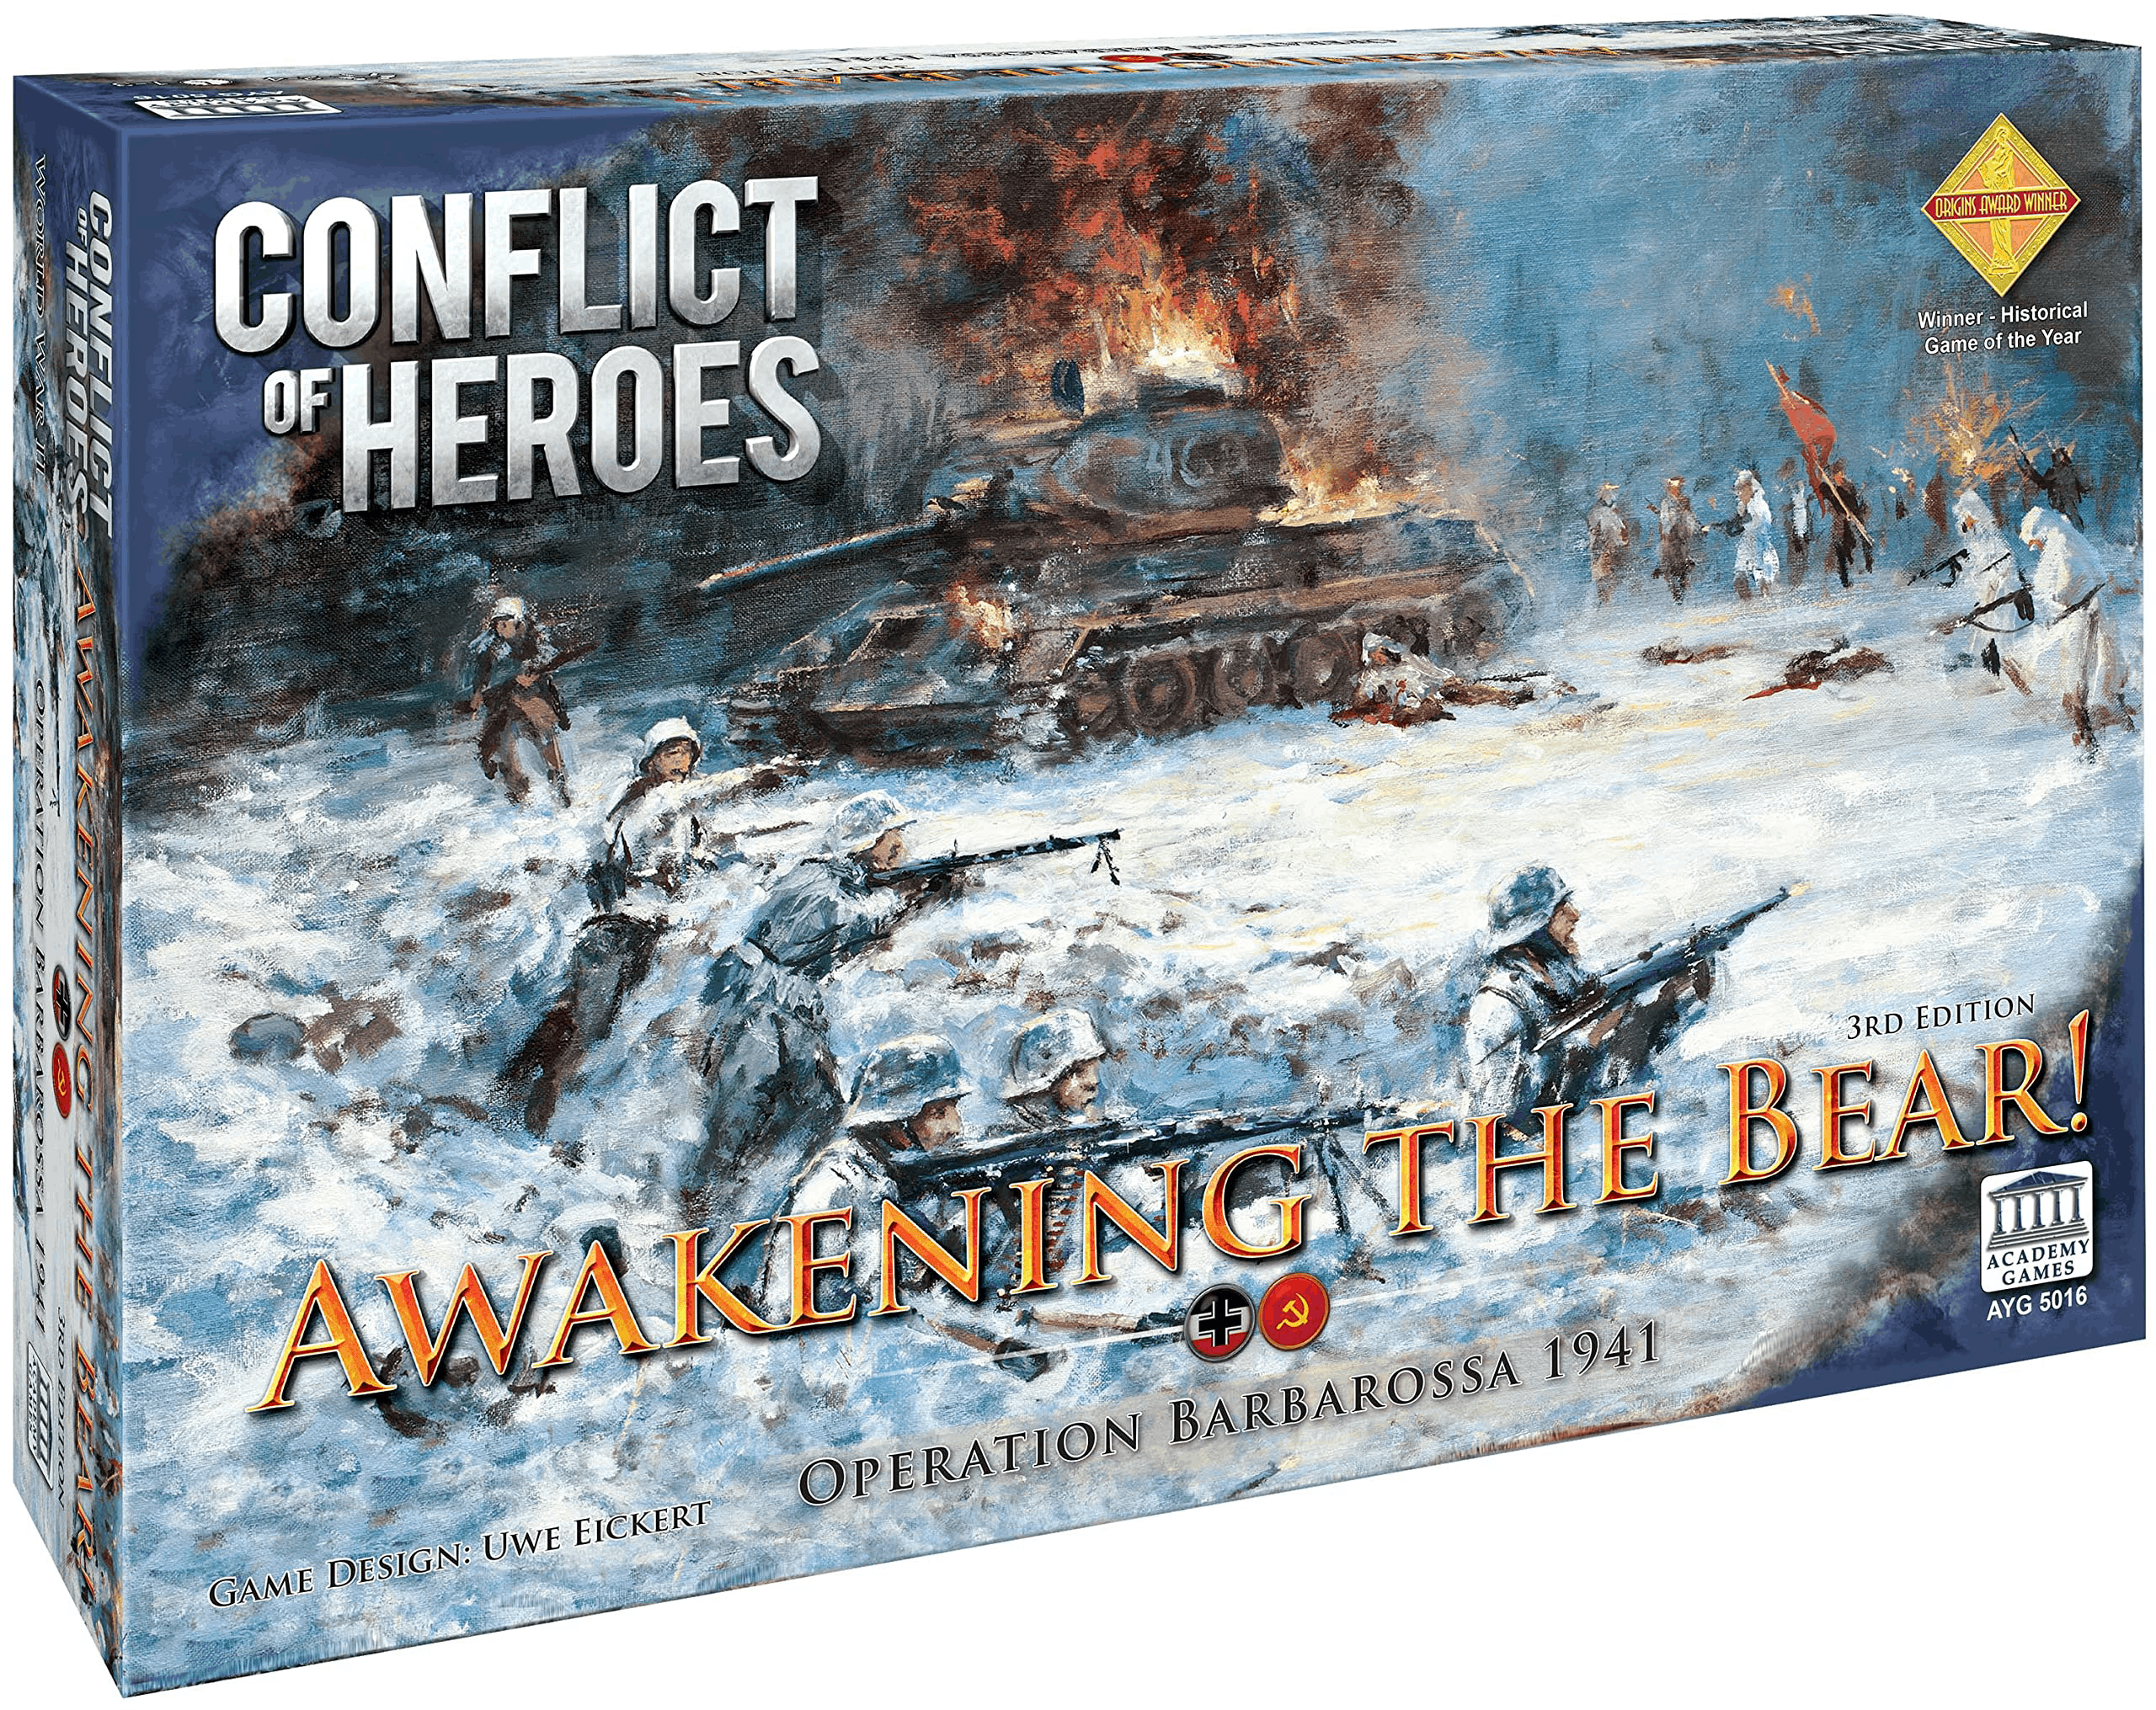 Conflict of Heroes: Awakening the Bear! - 3rd Edition